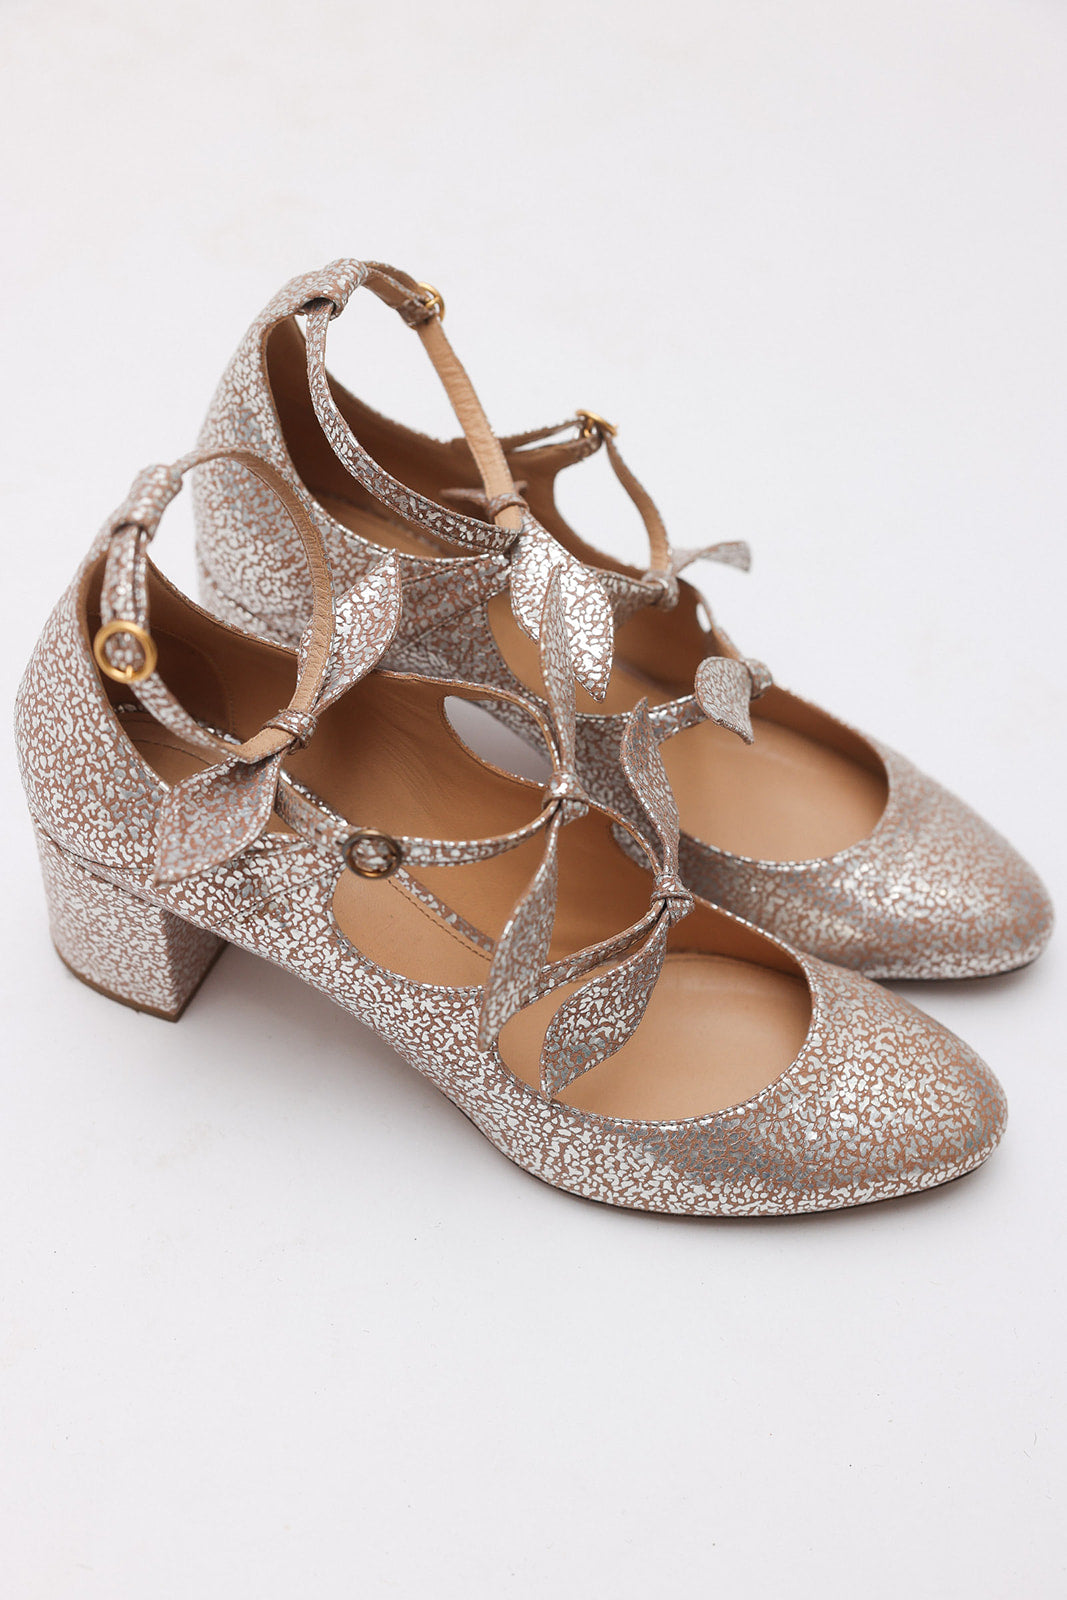 Chloe Silver Crackled Leather Mary Jane's